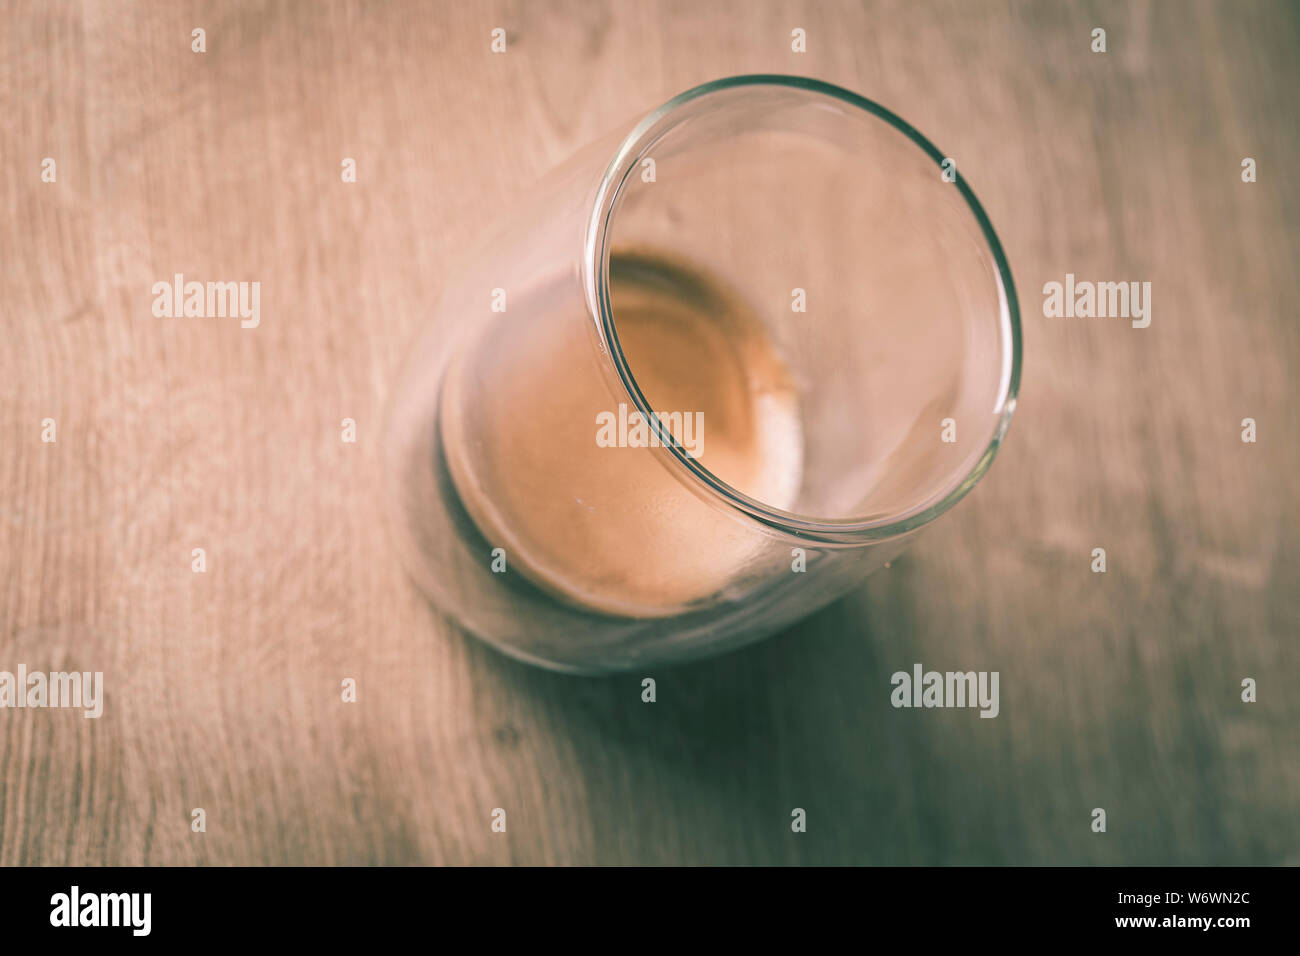 Espresso coffee served on a transparent drinking glass Stock Photo